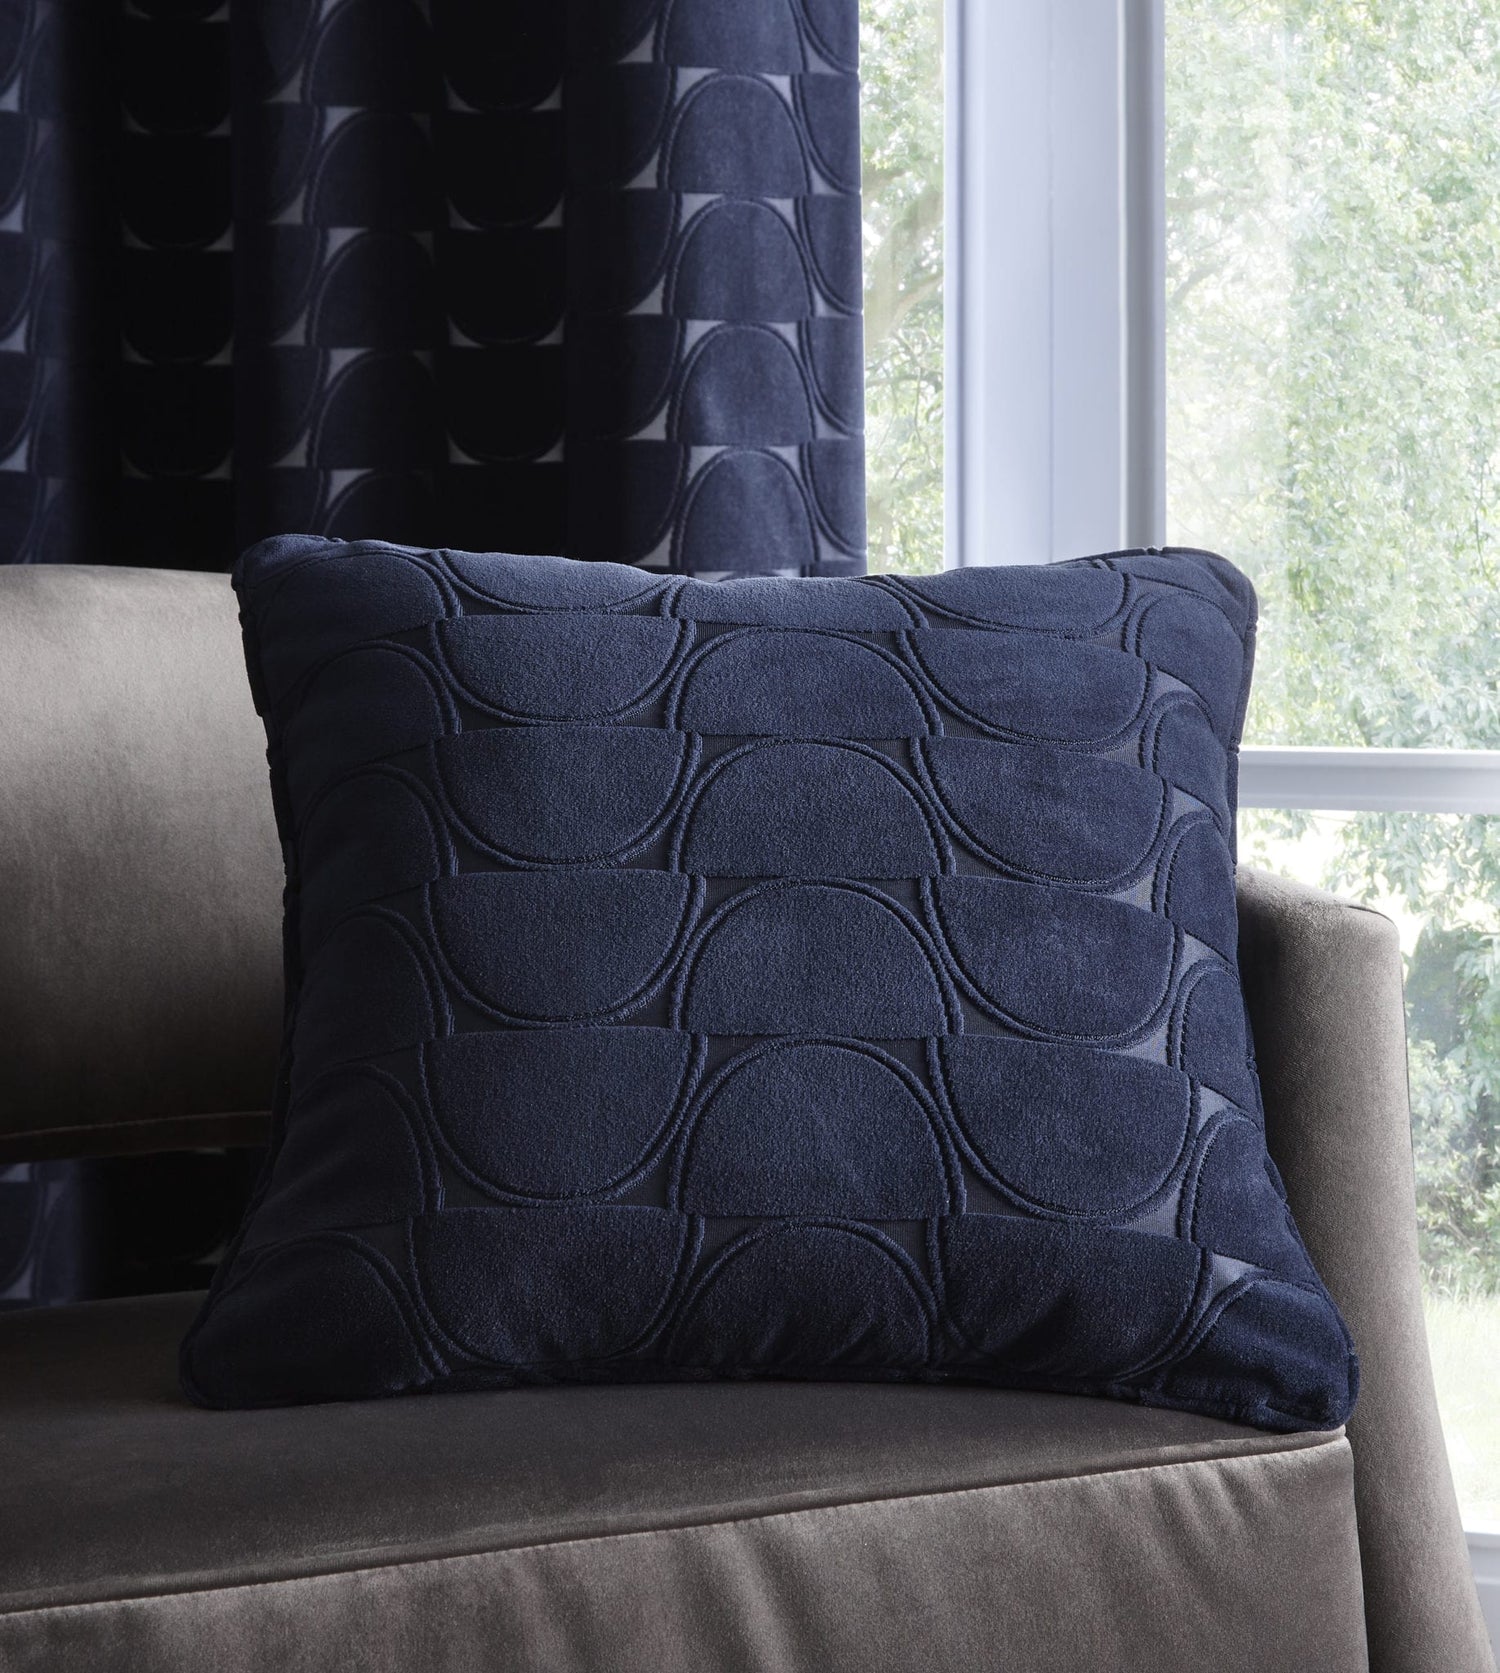 Lucca Midnight Cushion - Limited Stock